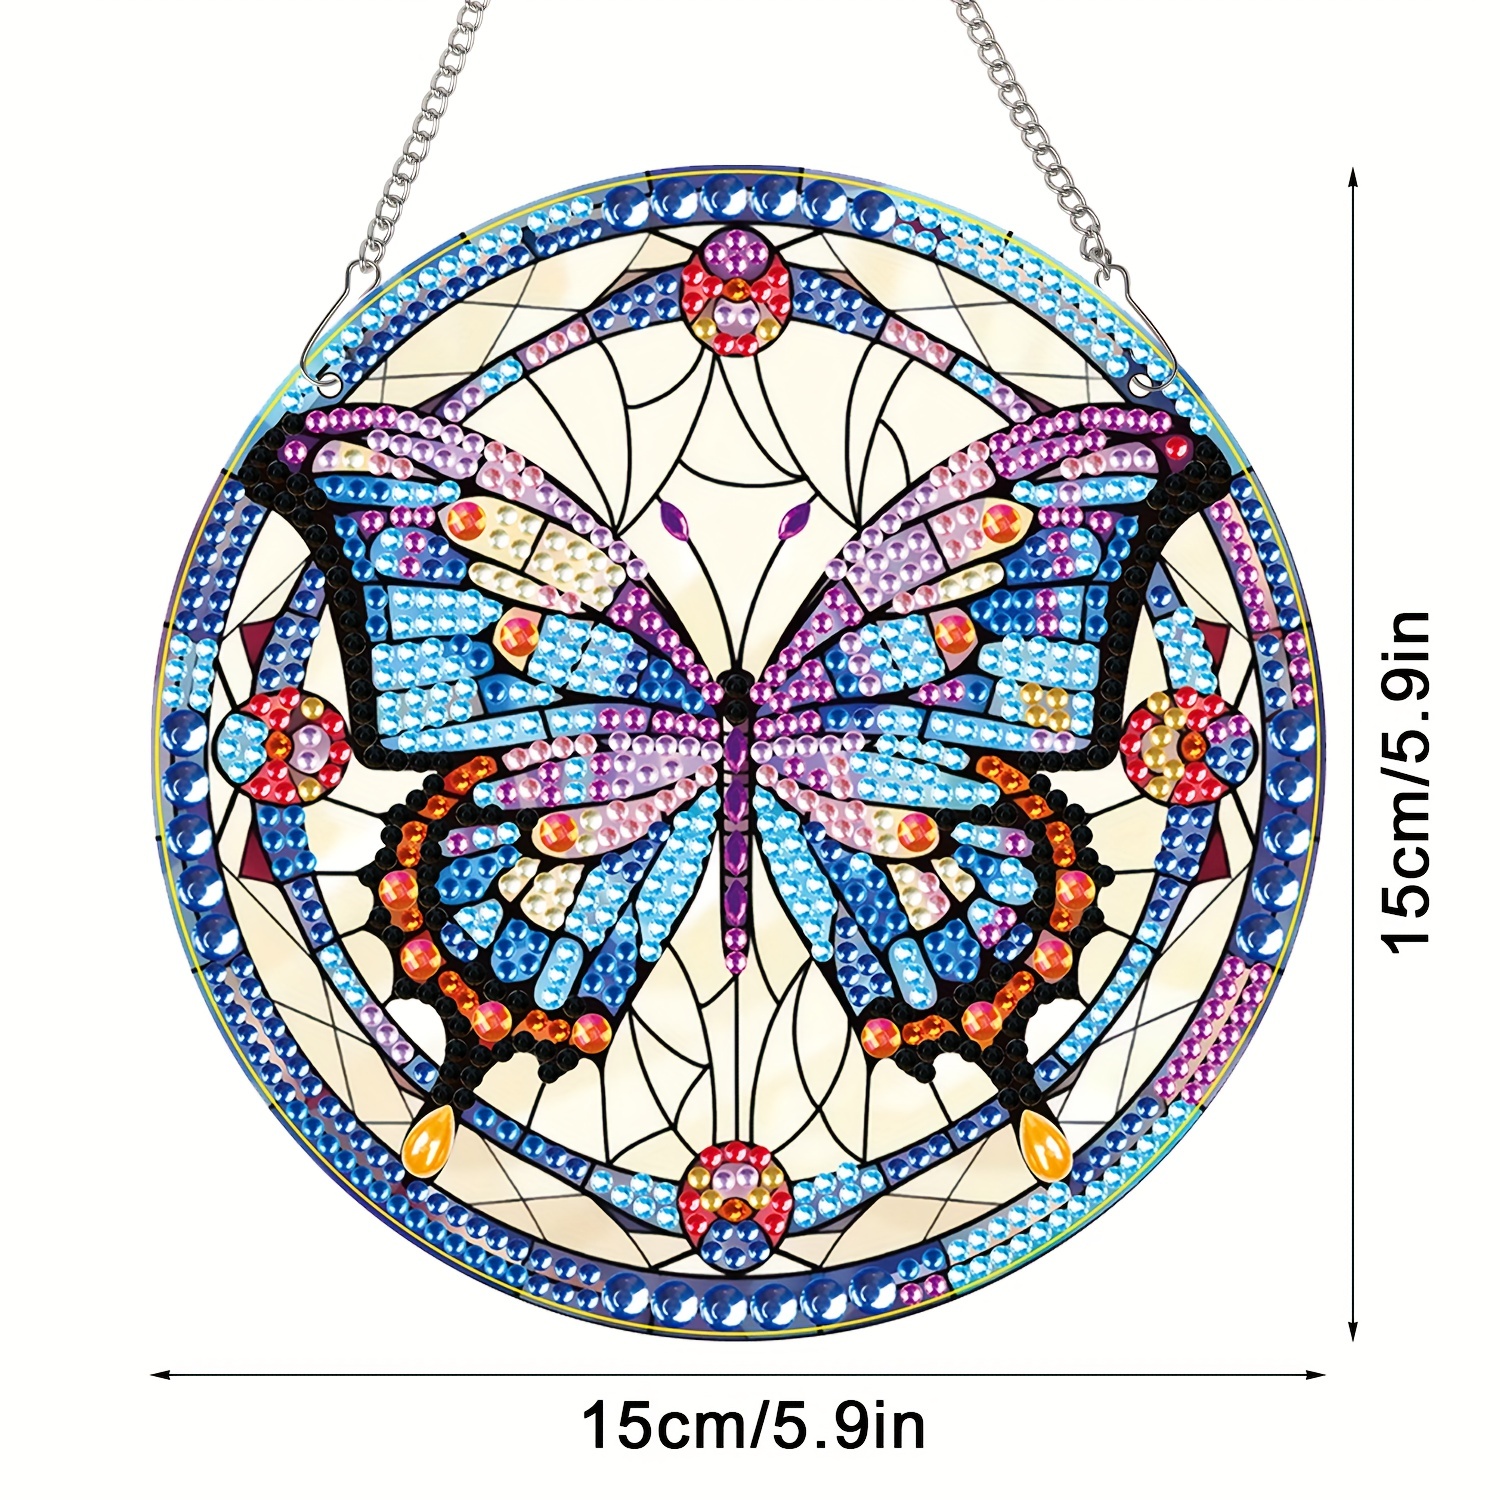 Diamond Painting Hanging, Butterfly 3D Three-dimensional Diamond Painting  Kit, Diamond Art Hanging Decorations, Suitable For Home Wall Garden Decorati